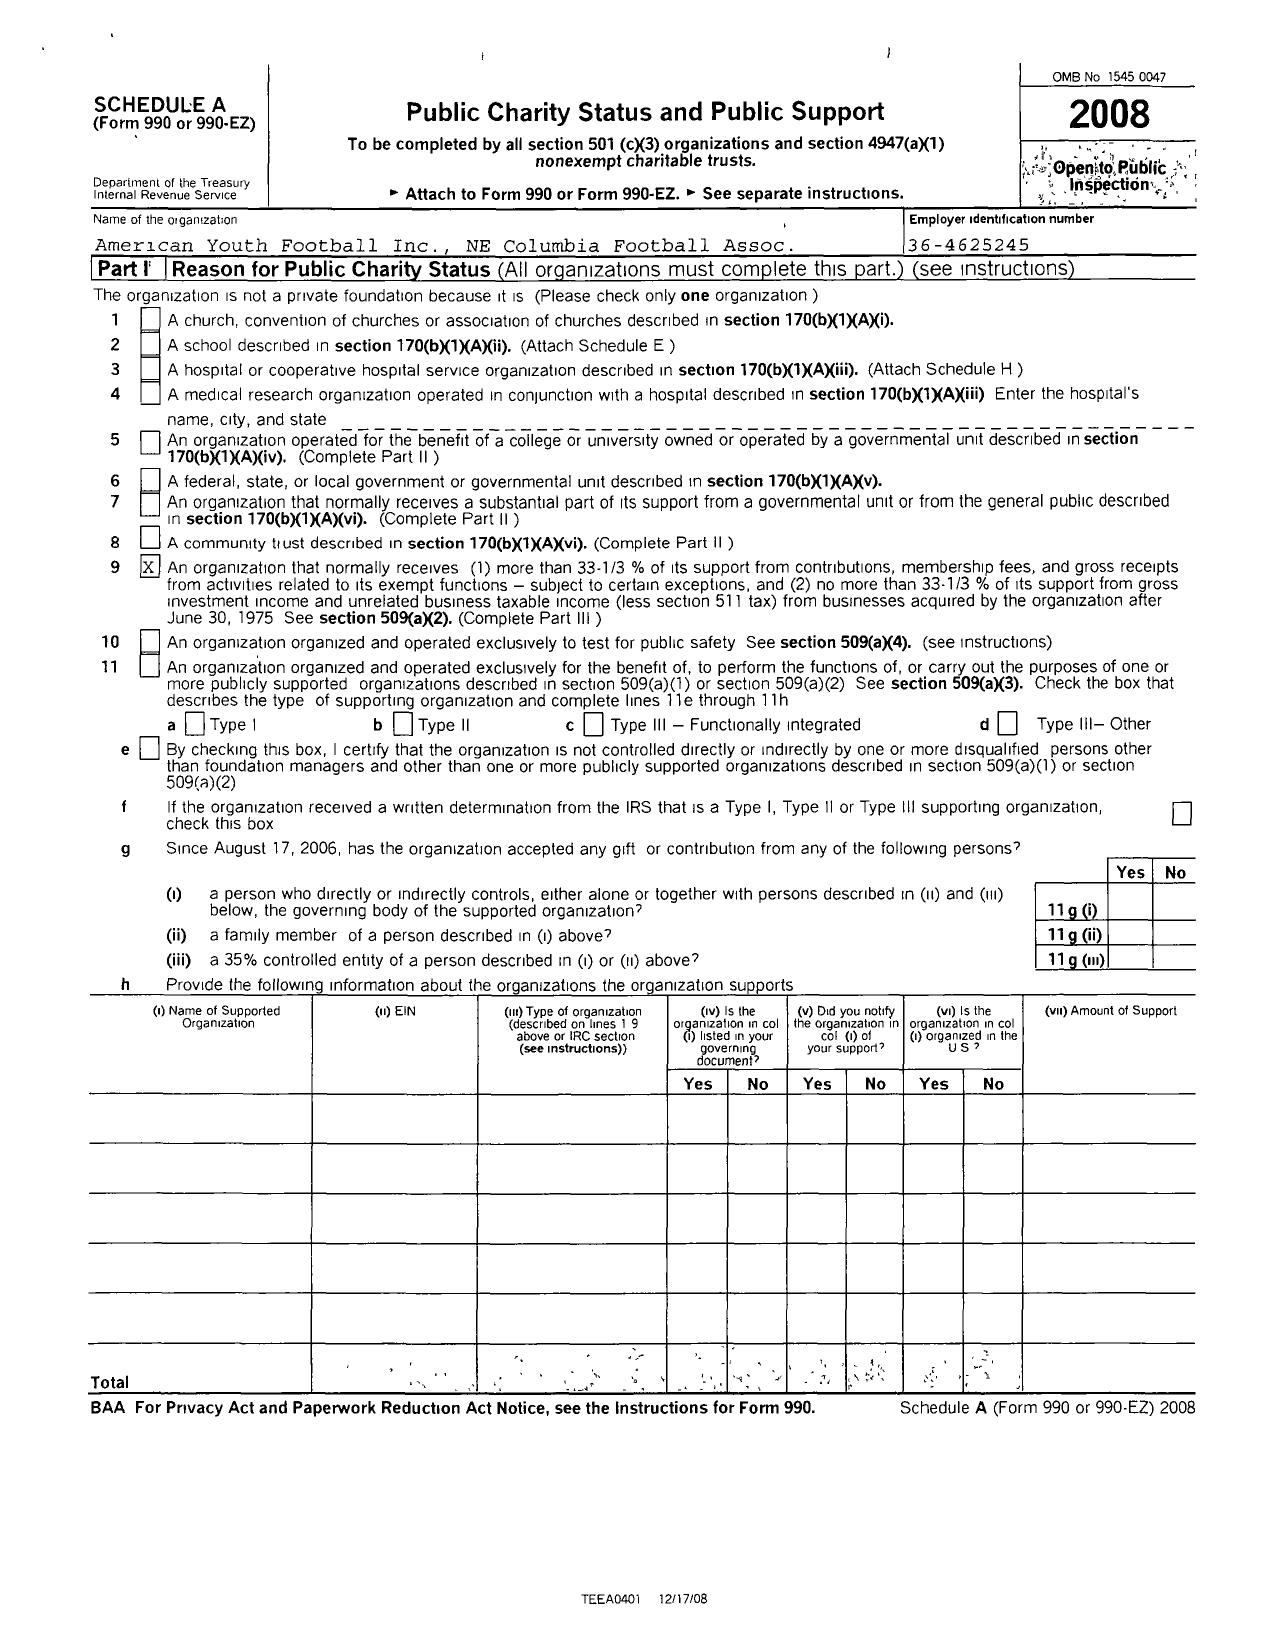 Image of first page of 2008 Form 990R for American Youth Football - Northeast Columbia Football Associa